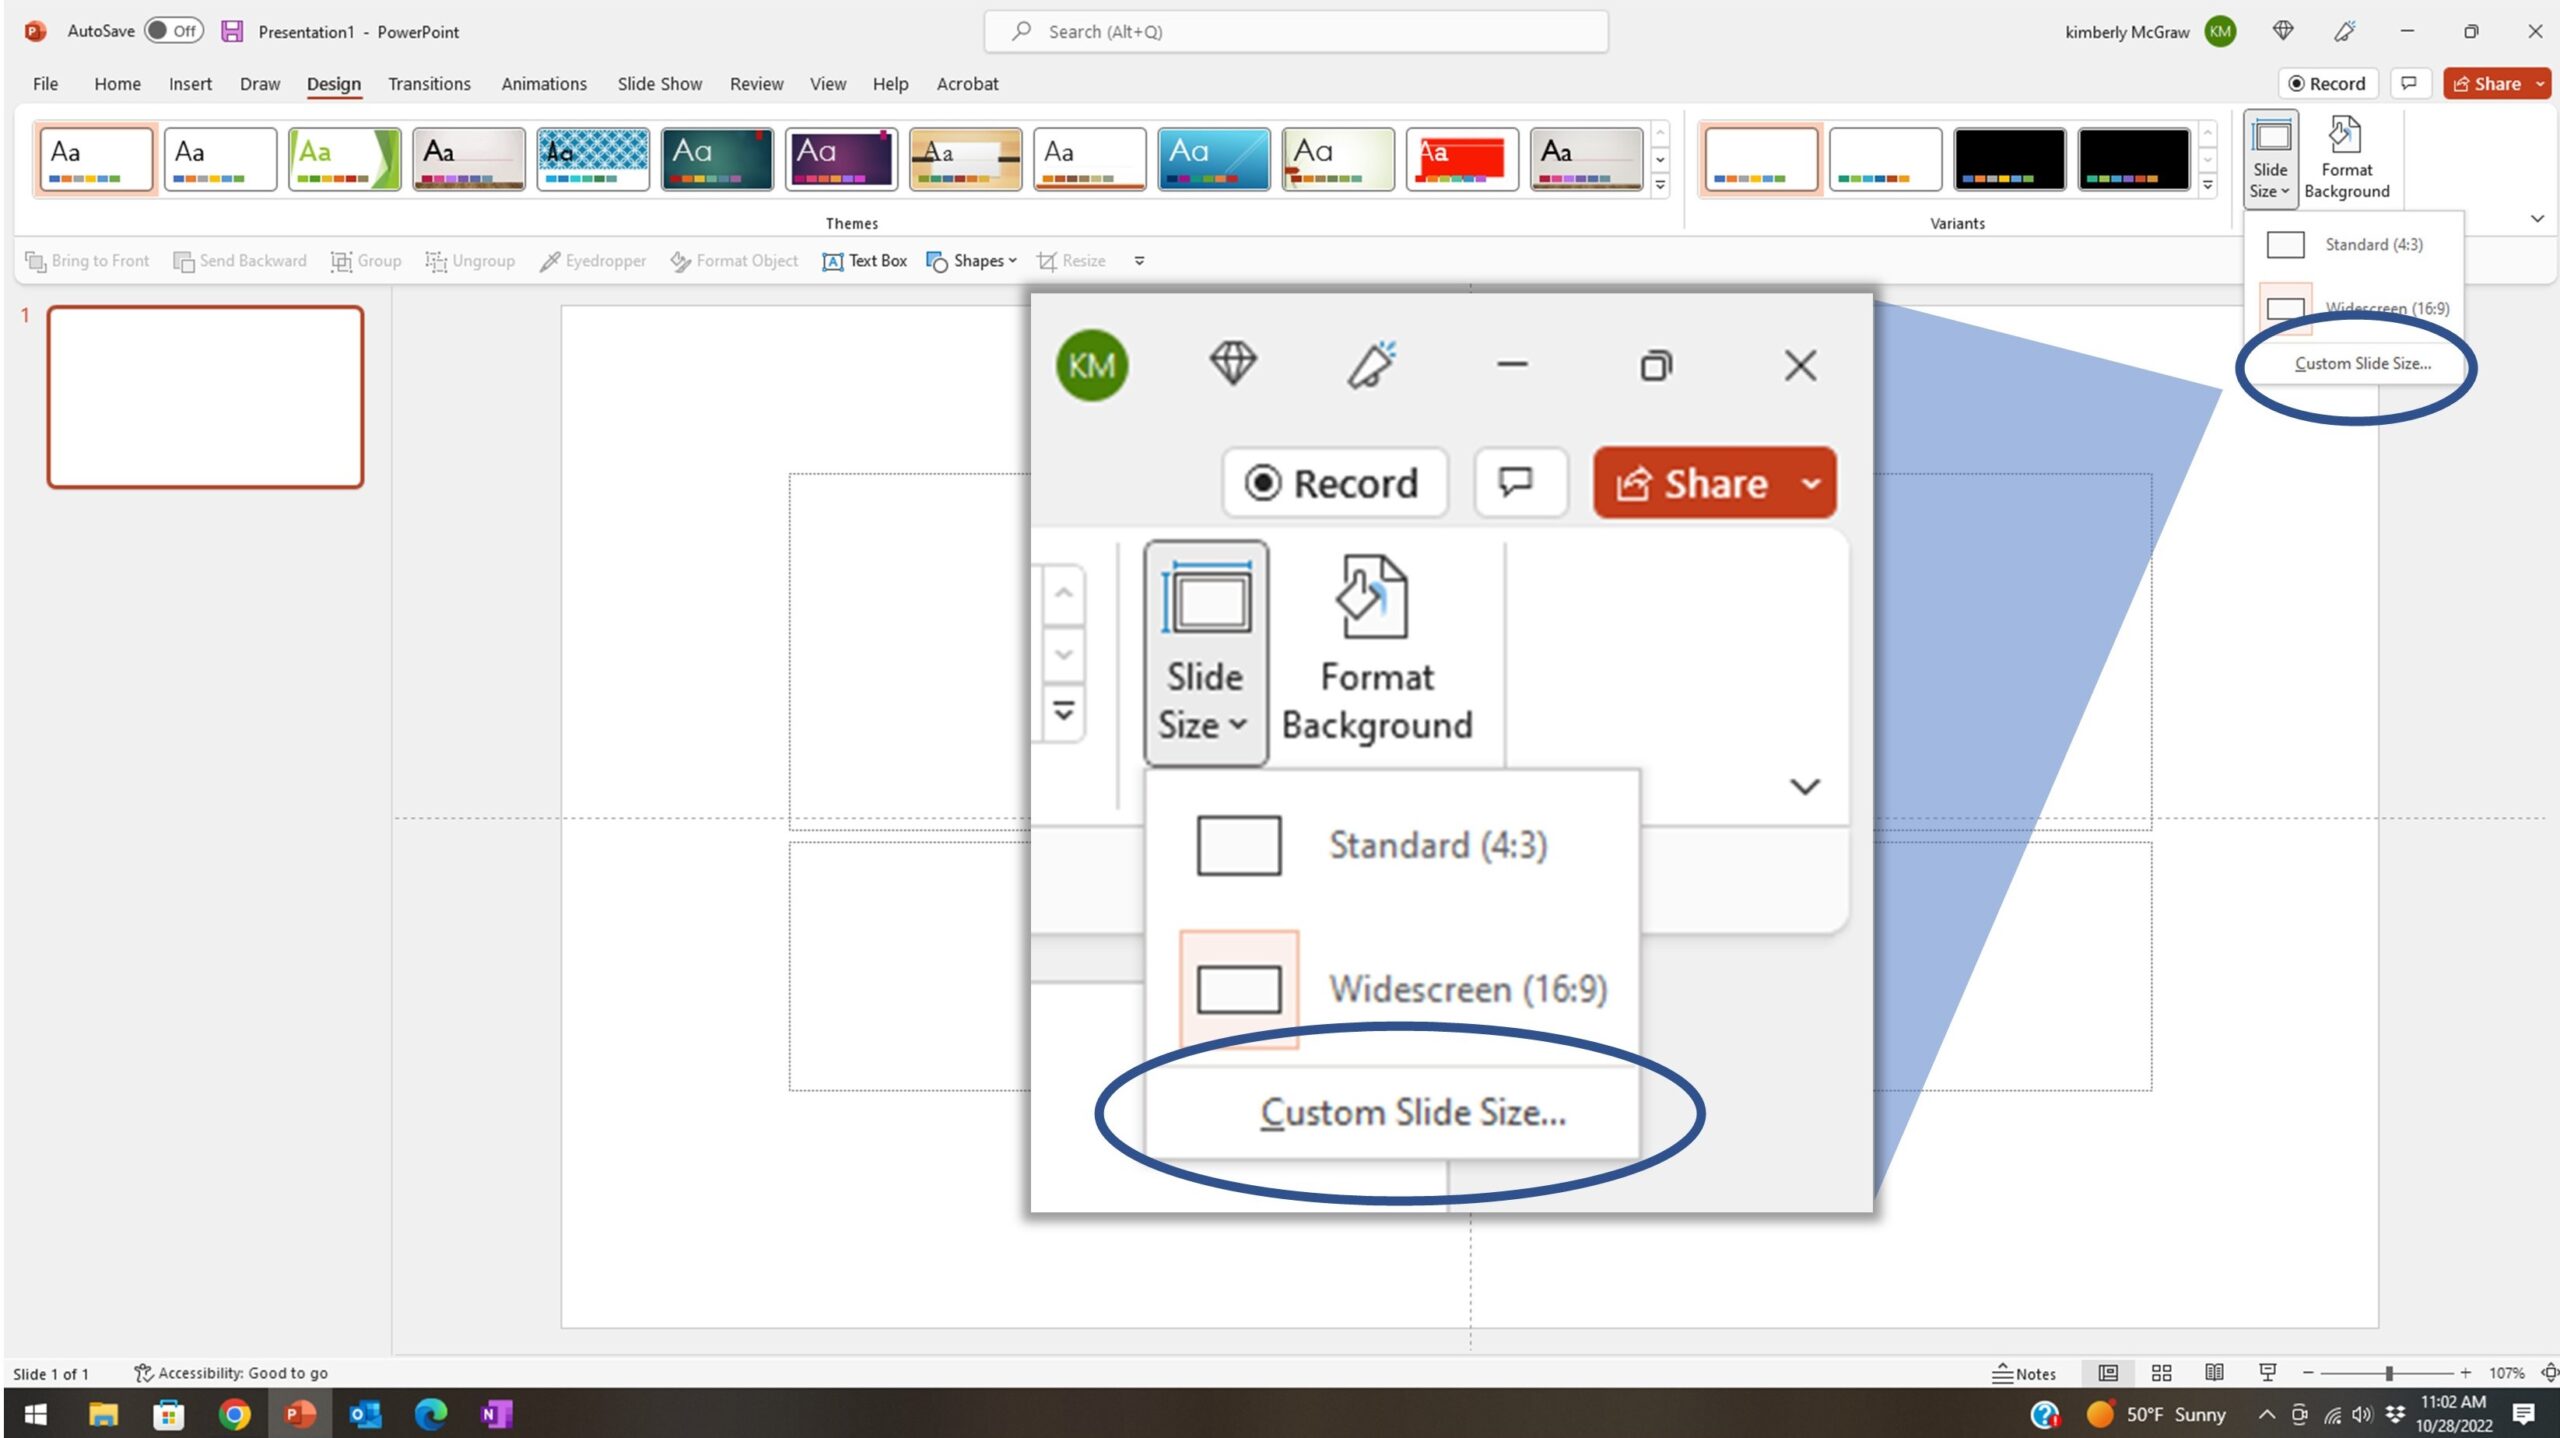 how to create a custom slide size in PowerPoint